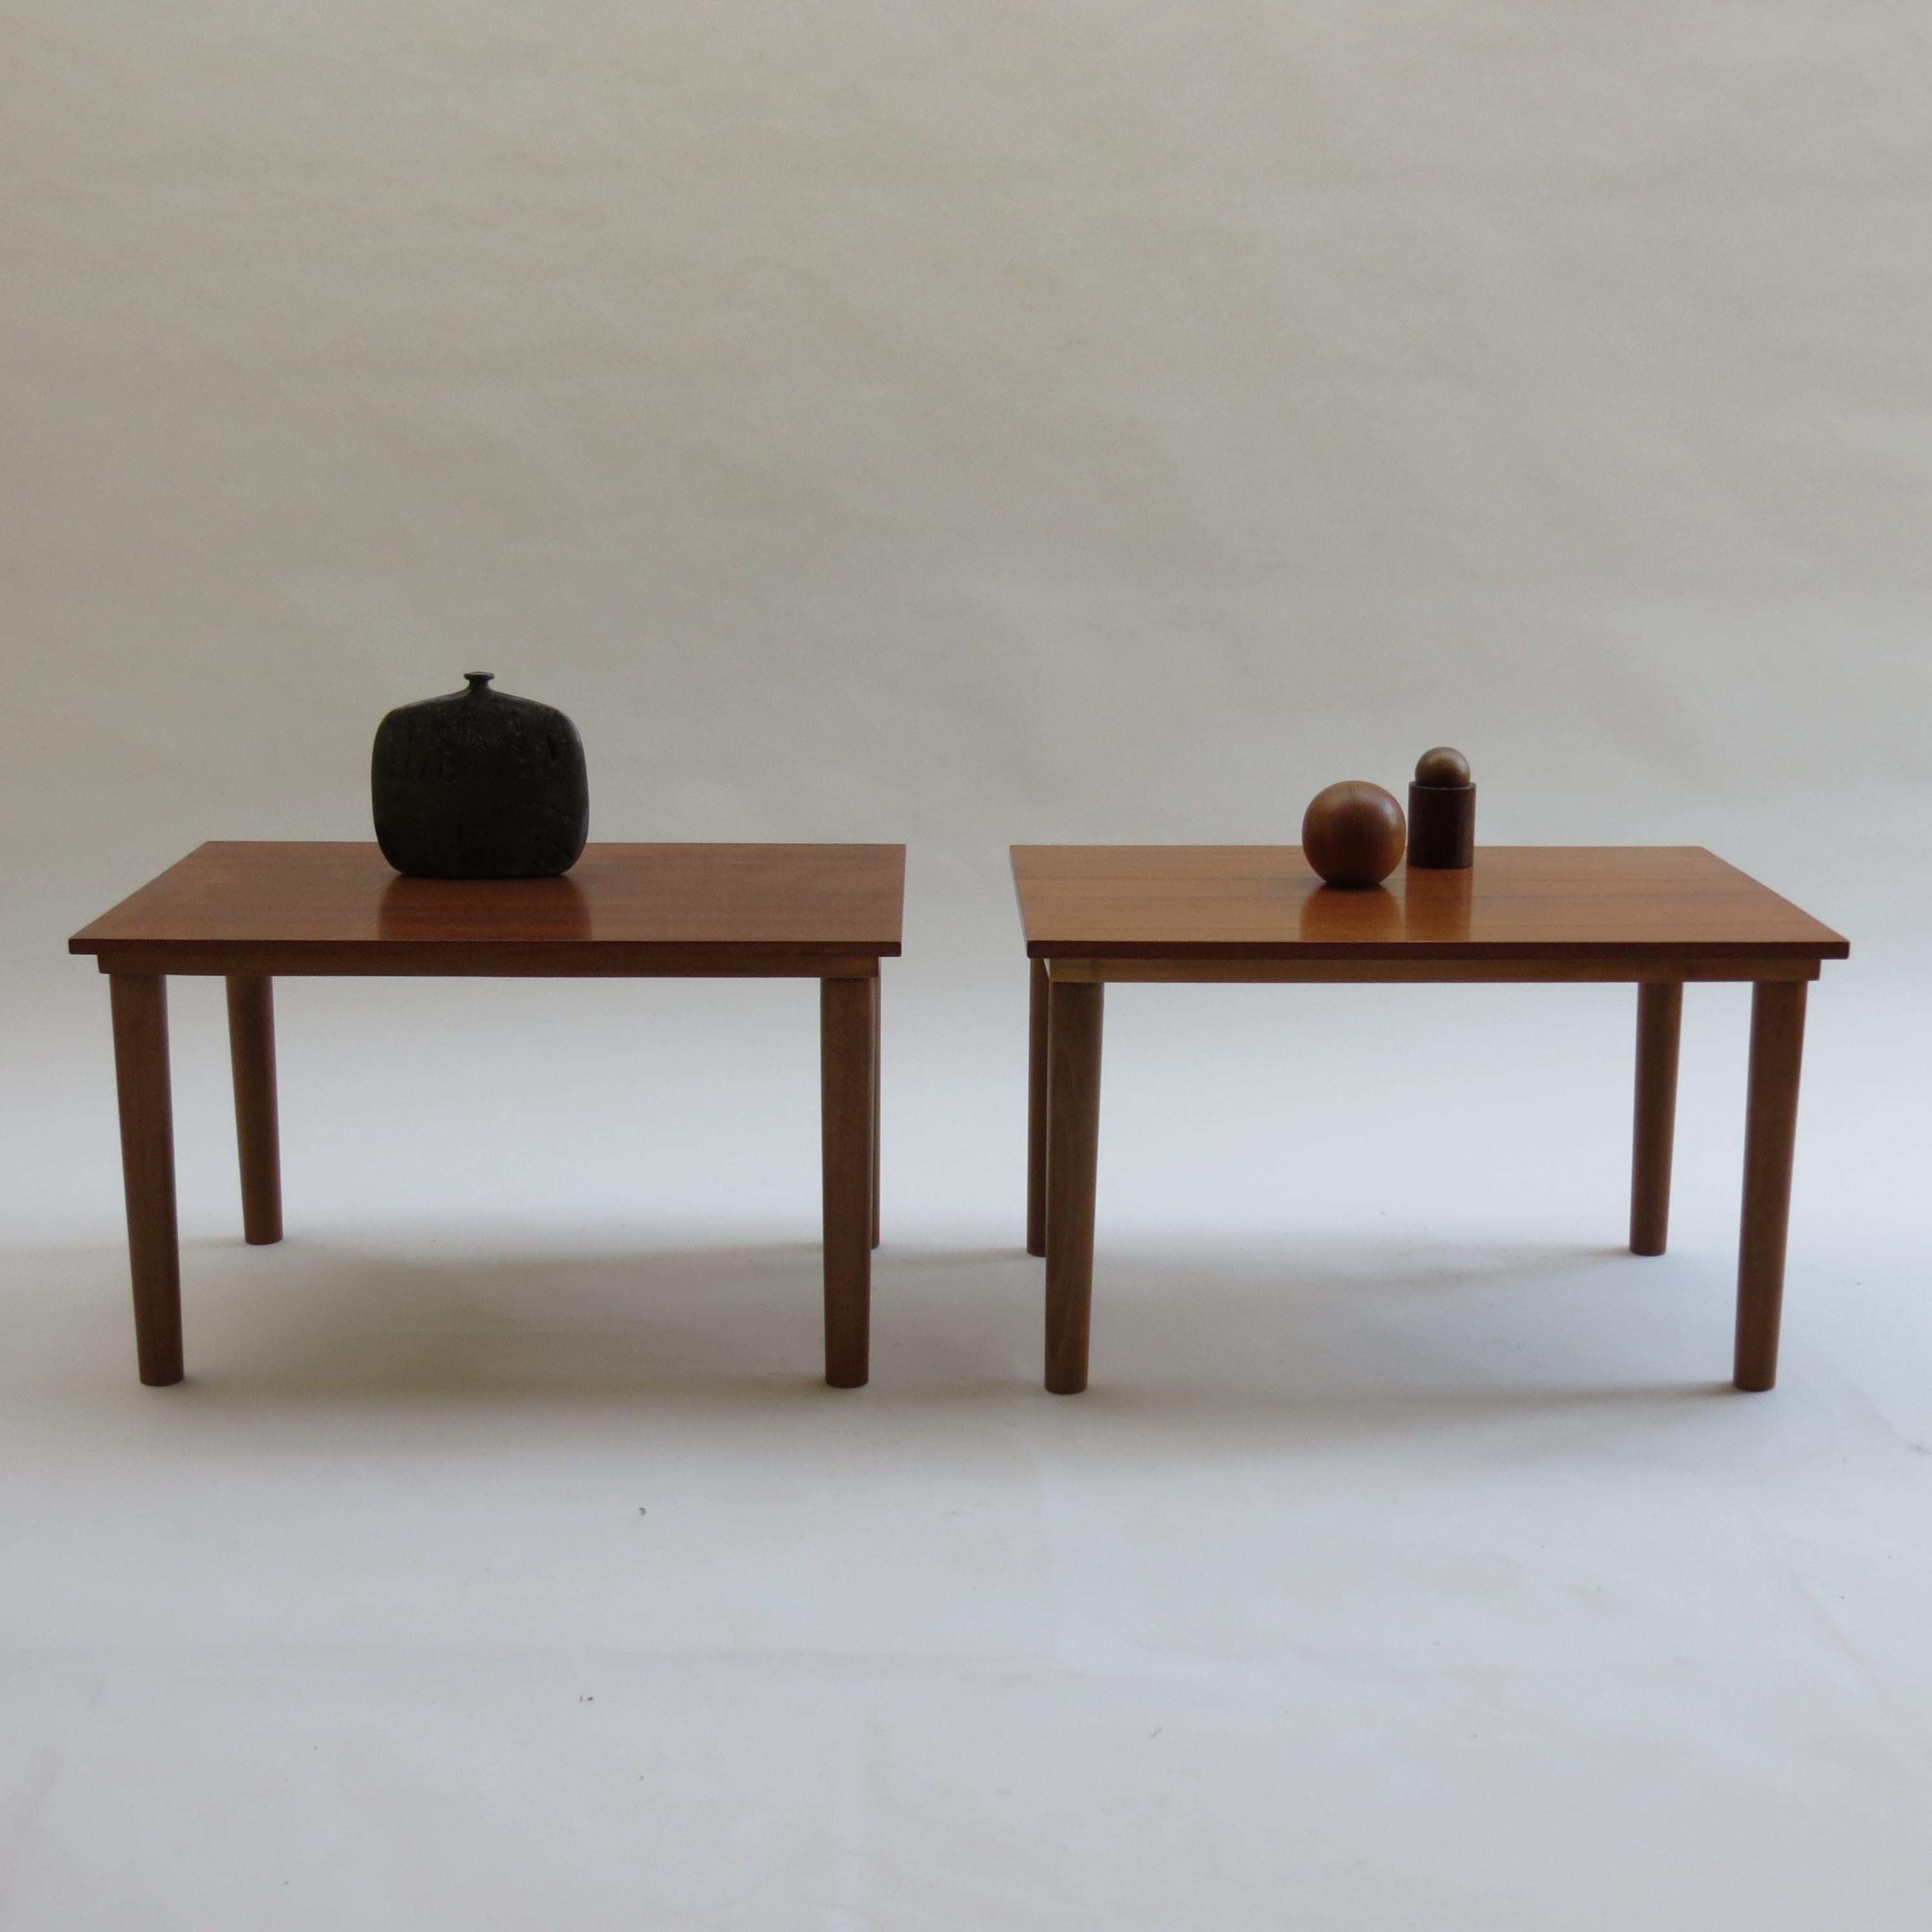 A pair of midcentury side tables in the style of Børge Mogensen. With teak veneered tops and solid beech legs. Produced in the 1960s. In good vintage condition.
3 identical sets of pairs of tables are available.

ST1203.